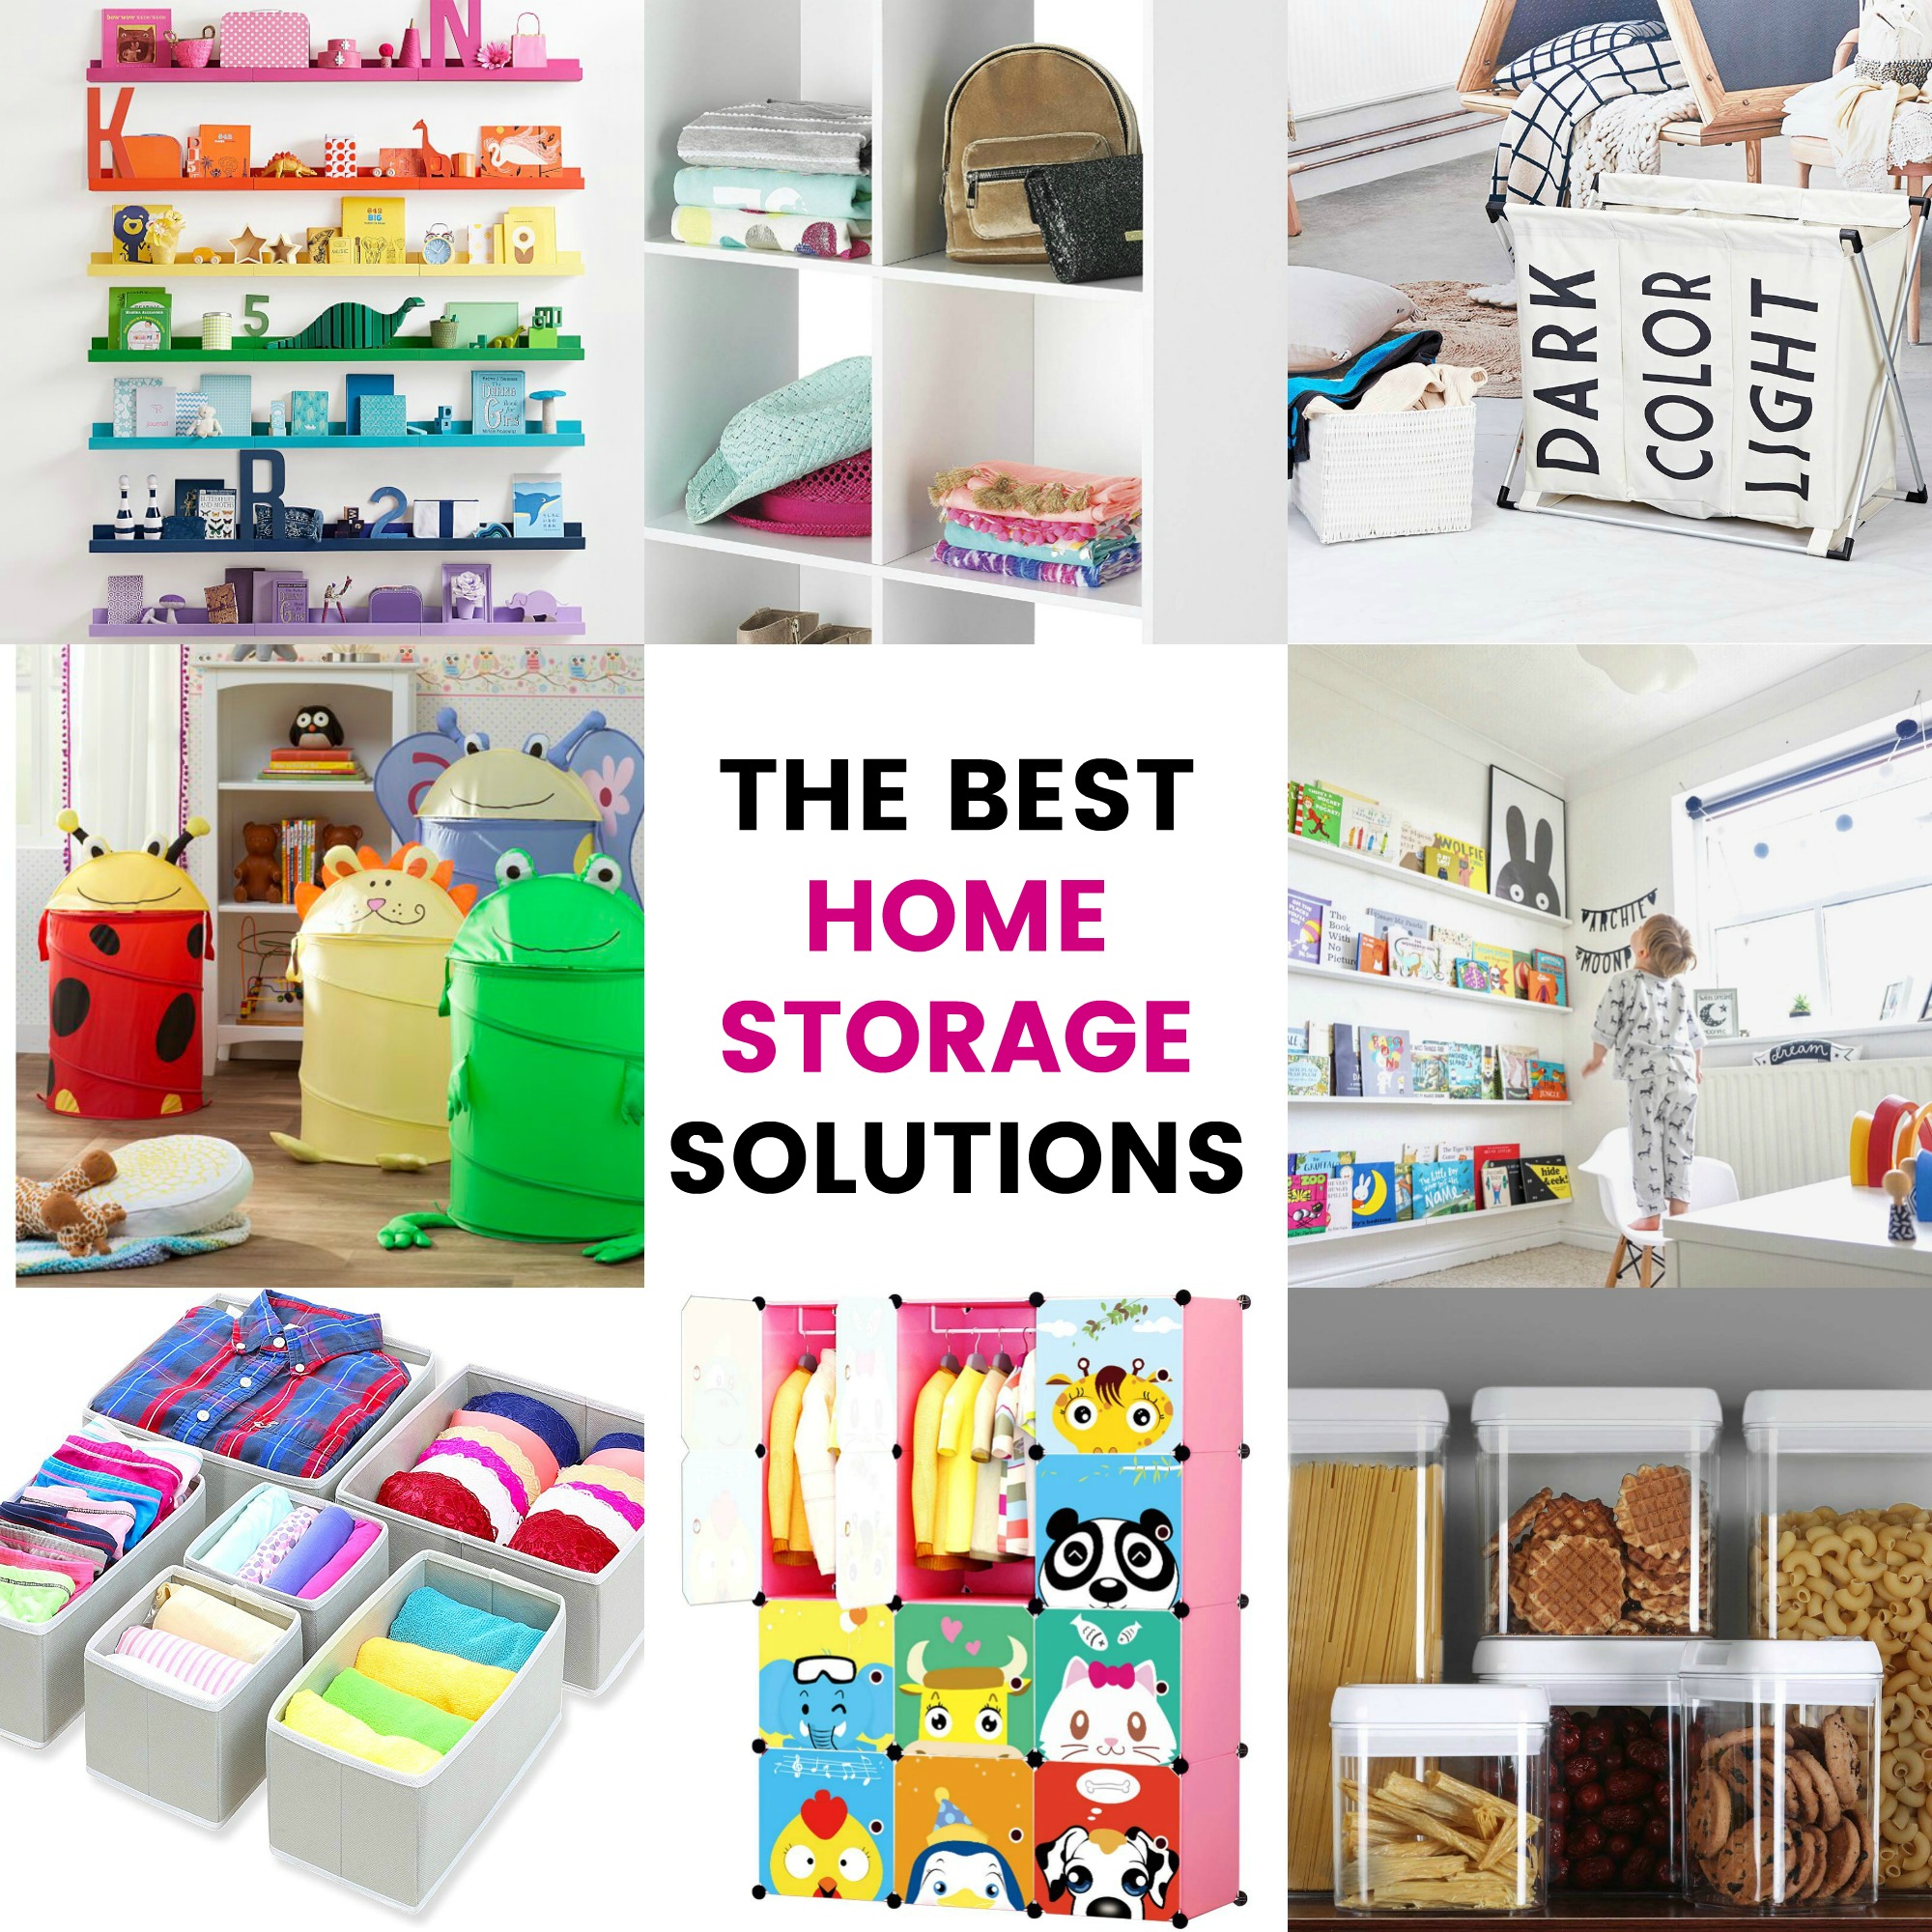 Home Storage Ideas: How to organize your house once and for all!